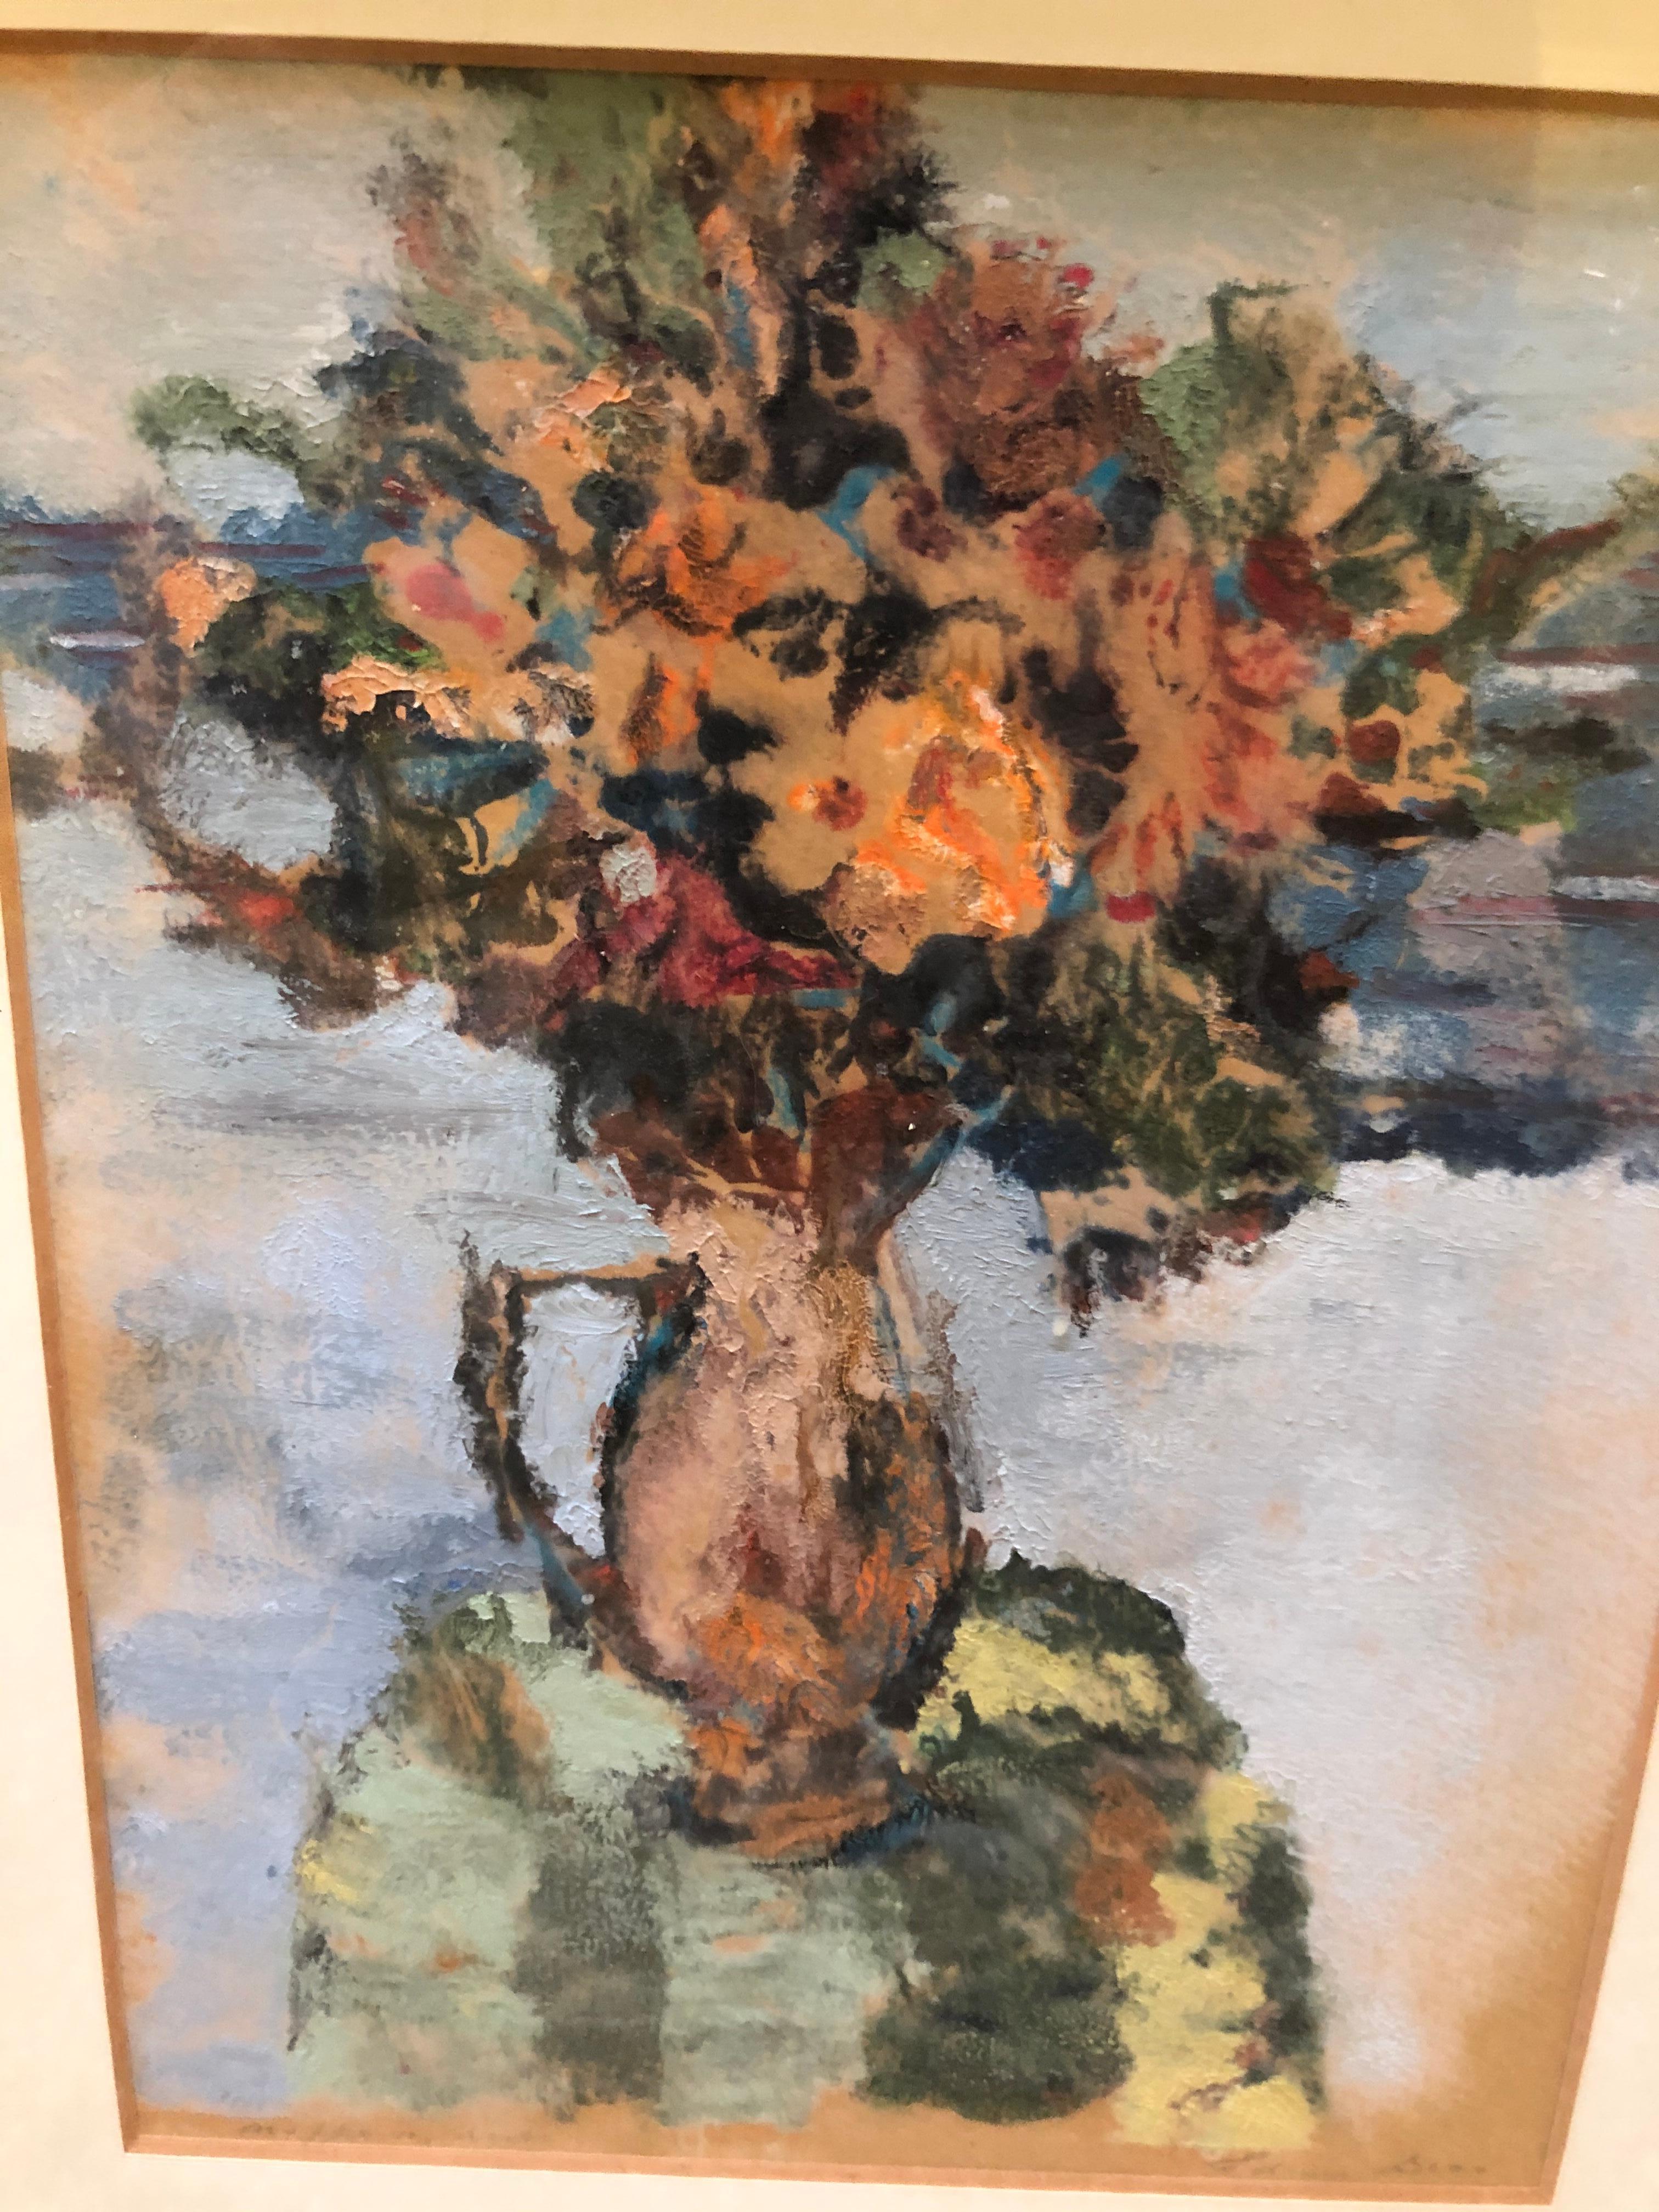 Edna Gass Still Life - American Impressionist Painting by Edna Gass, Early 20th Century